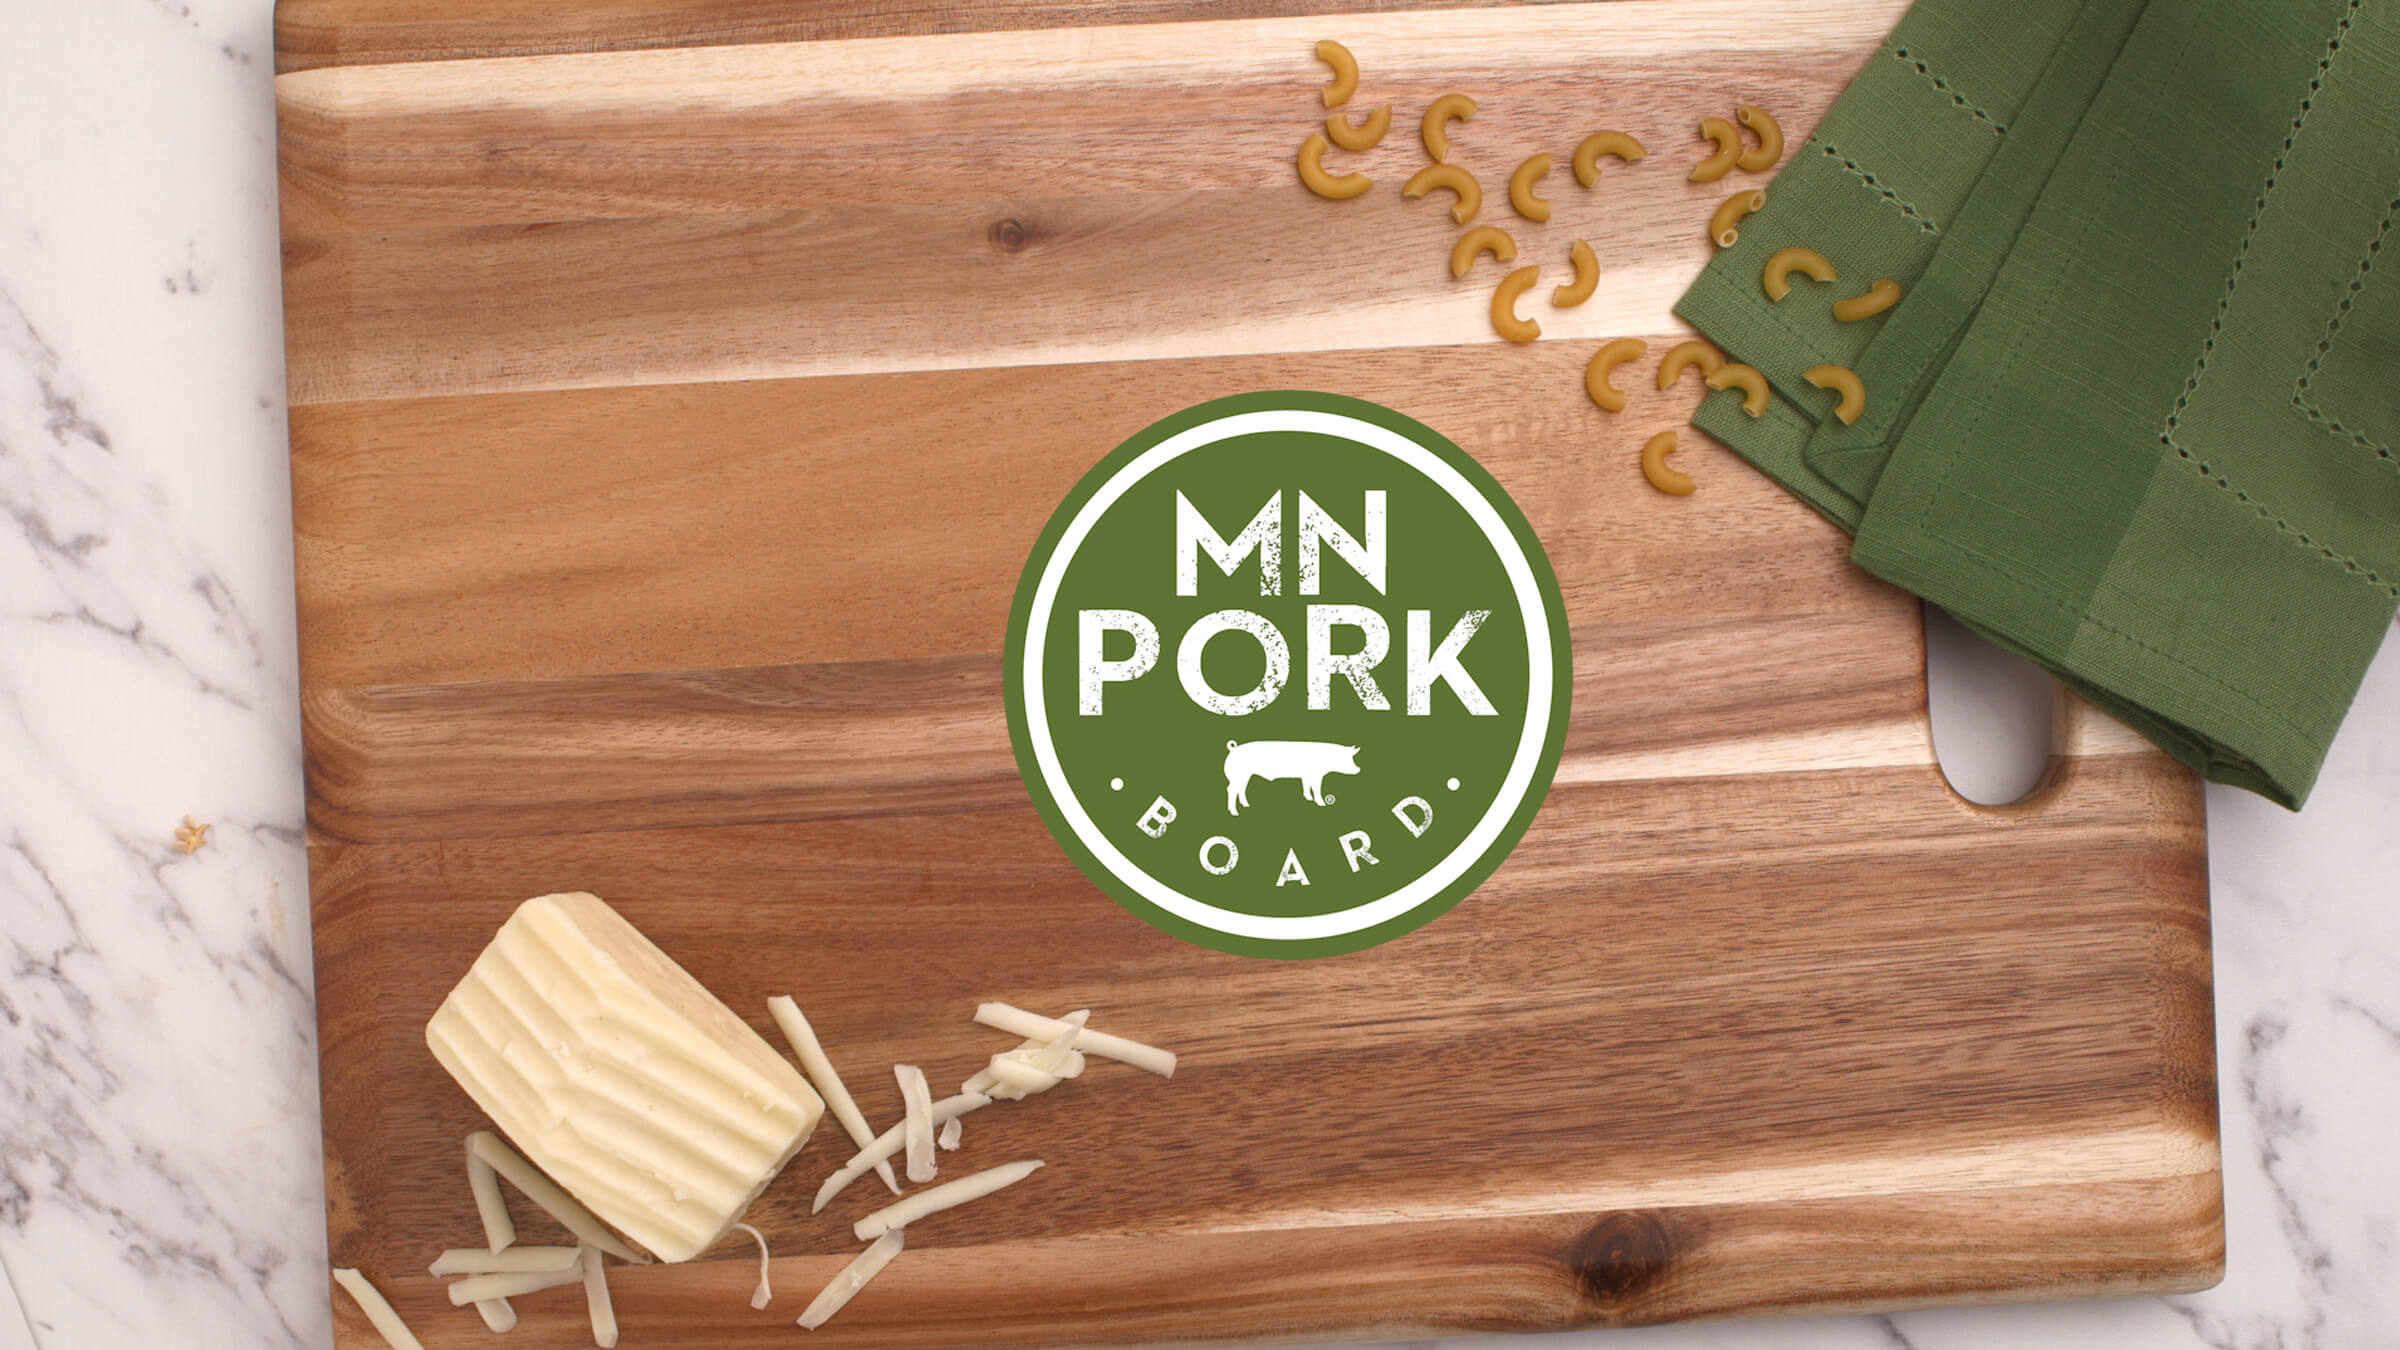 Minnesota Pork Board campaign image with branded cutting board, cheese and pasta